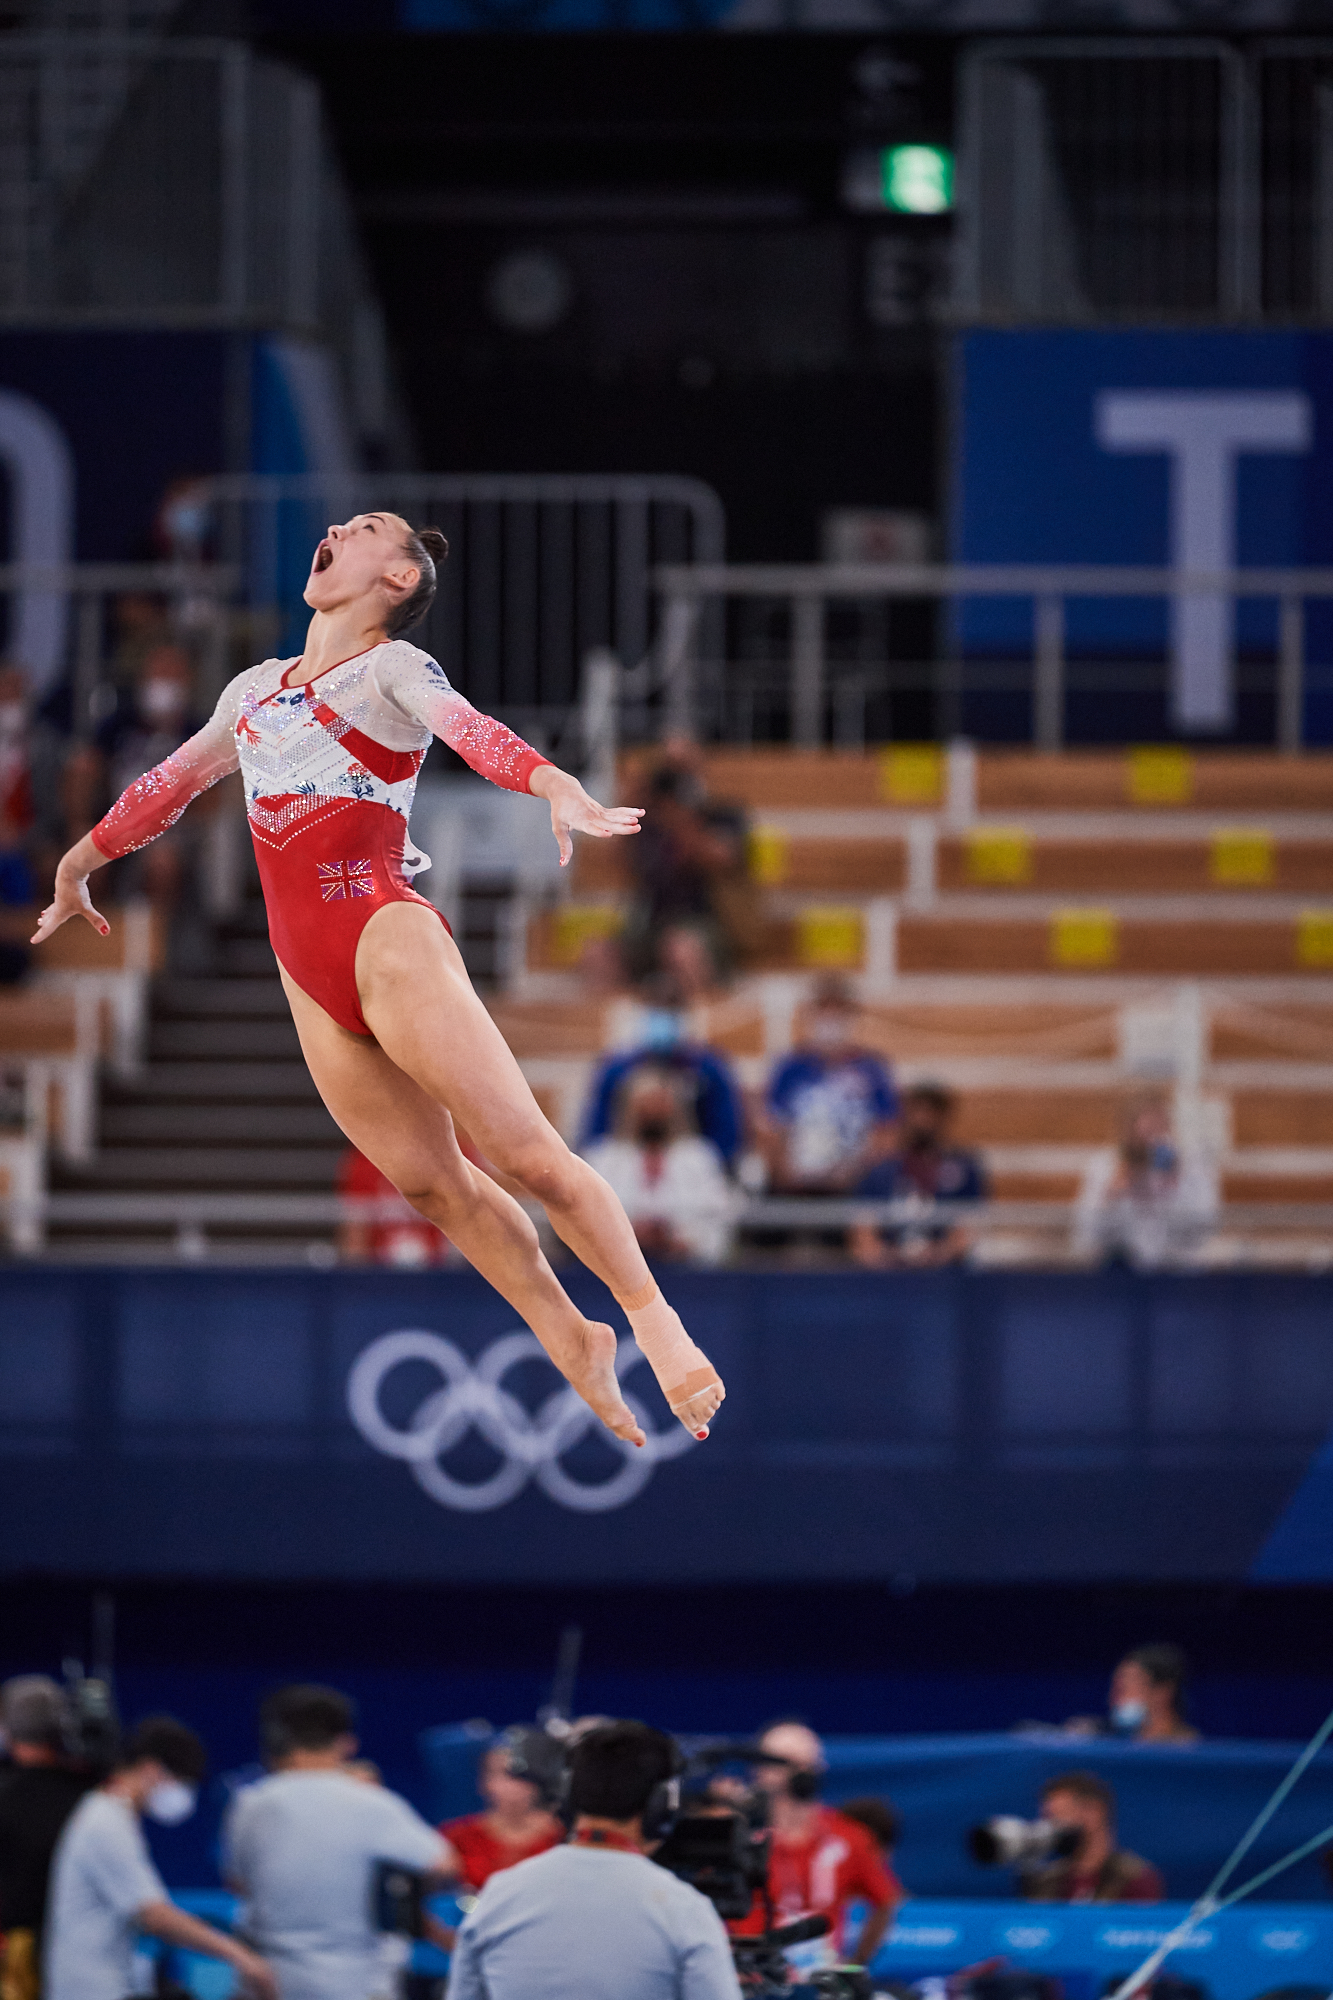 Photograph of Great Britain's Jennifer Gadirova, competing on the floor in Rotation 2 during the race for 3rd place at women's gymnastics finals during the 2020 Tokyo Olympics at Ariake Gymnastics Center in Tokyo, Japan.